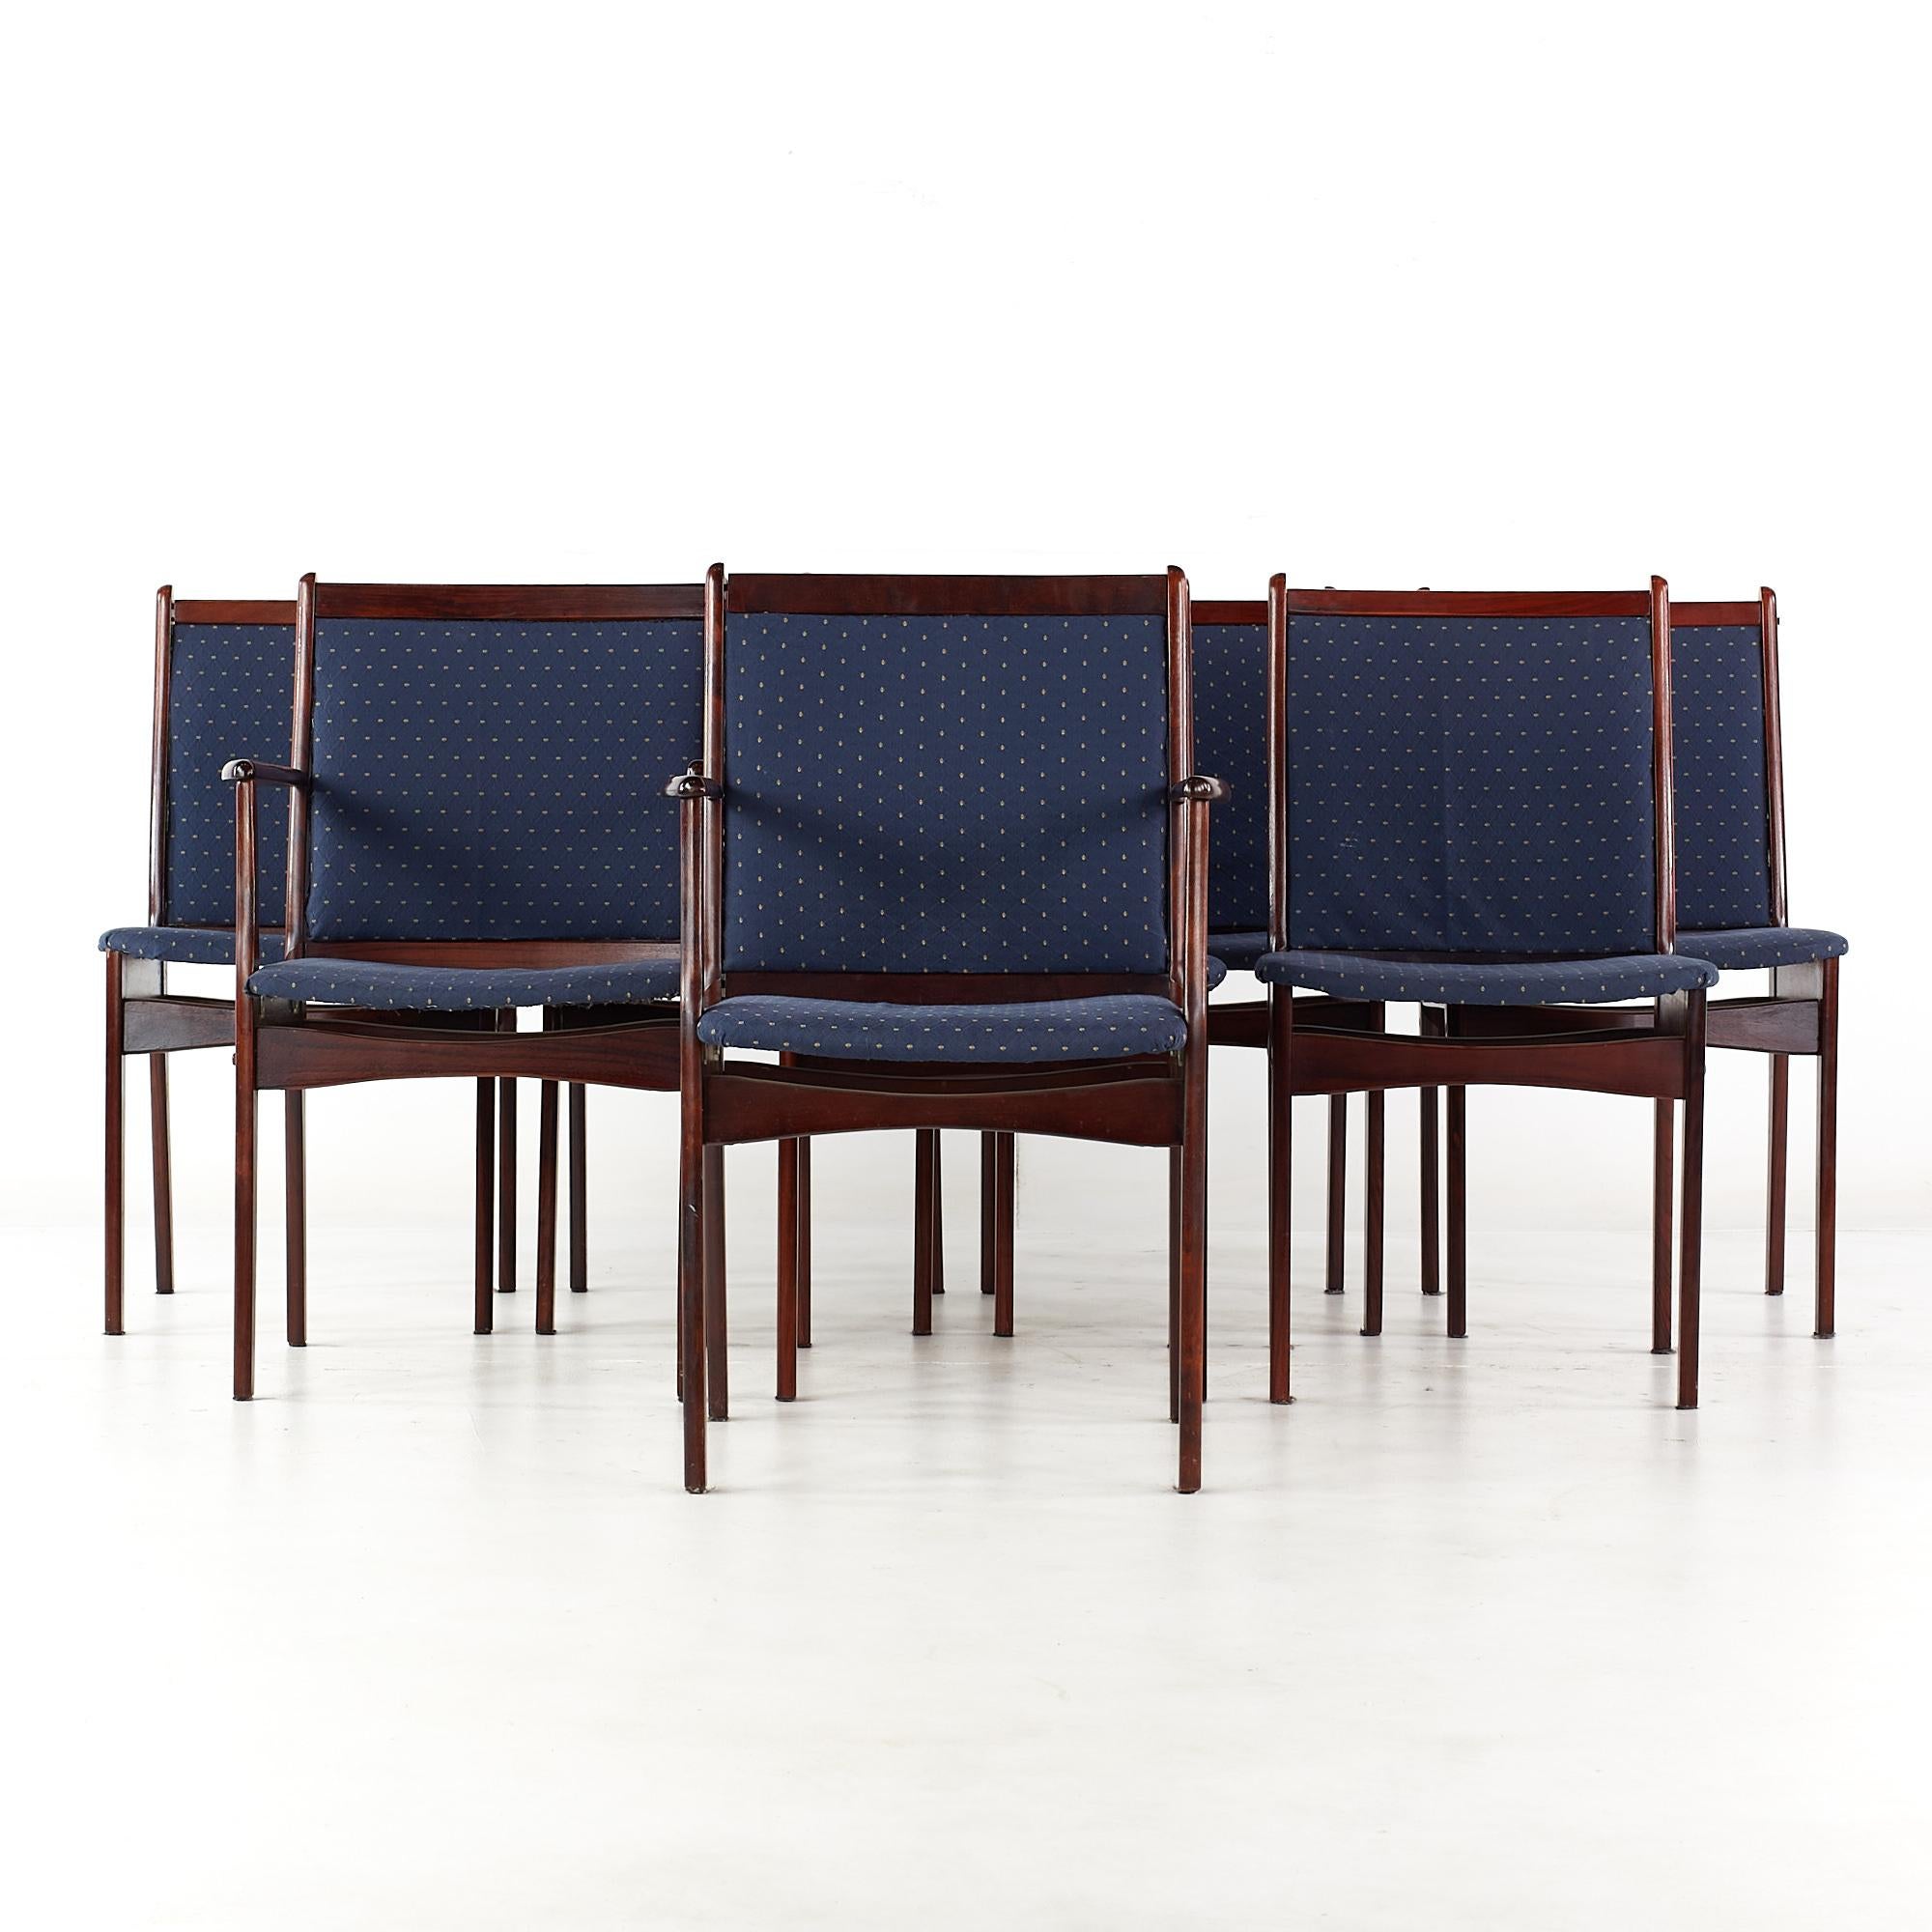 Erik Buch Style Mid Century Rosewood dining chairs - set of 8

Each armless chair measures: 19 wide x 20.5 deep x 34.5 high, with a seat height of 18 inches
Each captains chair measures: 22 wide x 21.25 deep x 34.5 high, with a seat height of 18